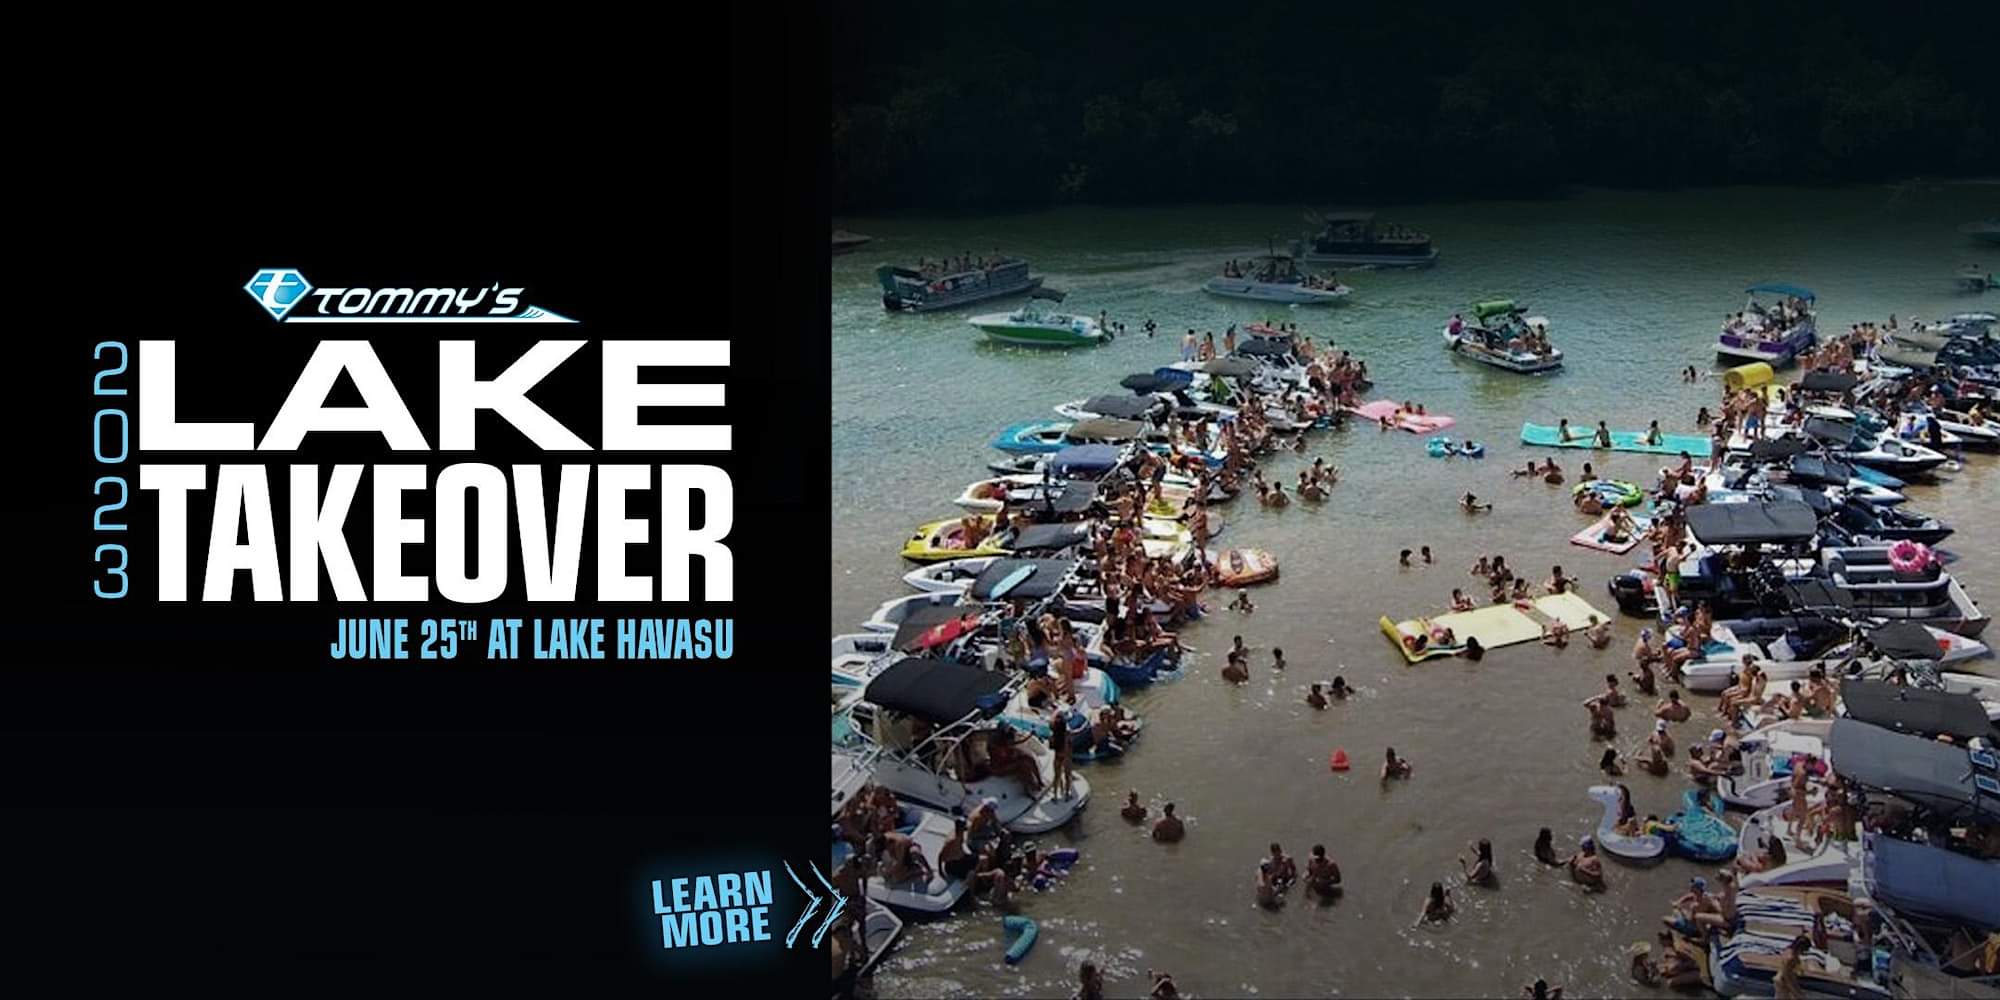 Tommy’s Lake Takeover Day